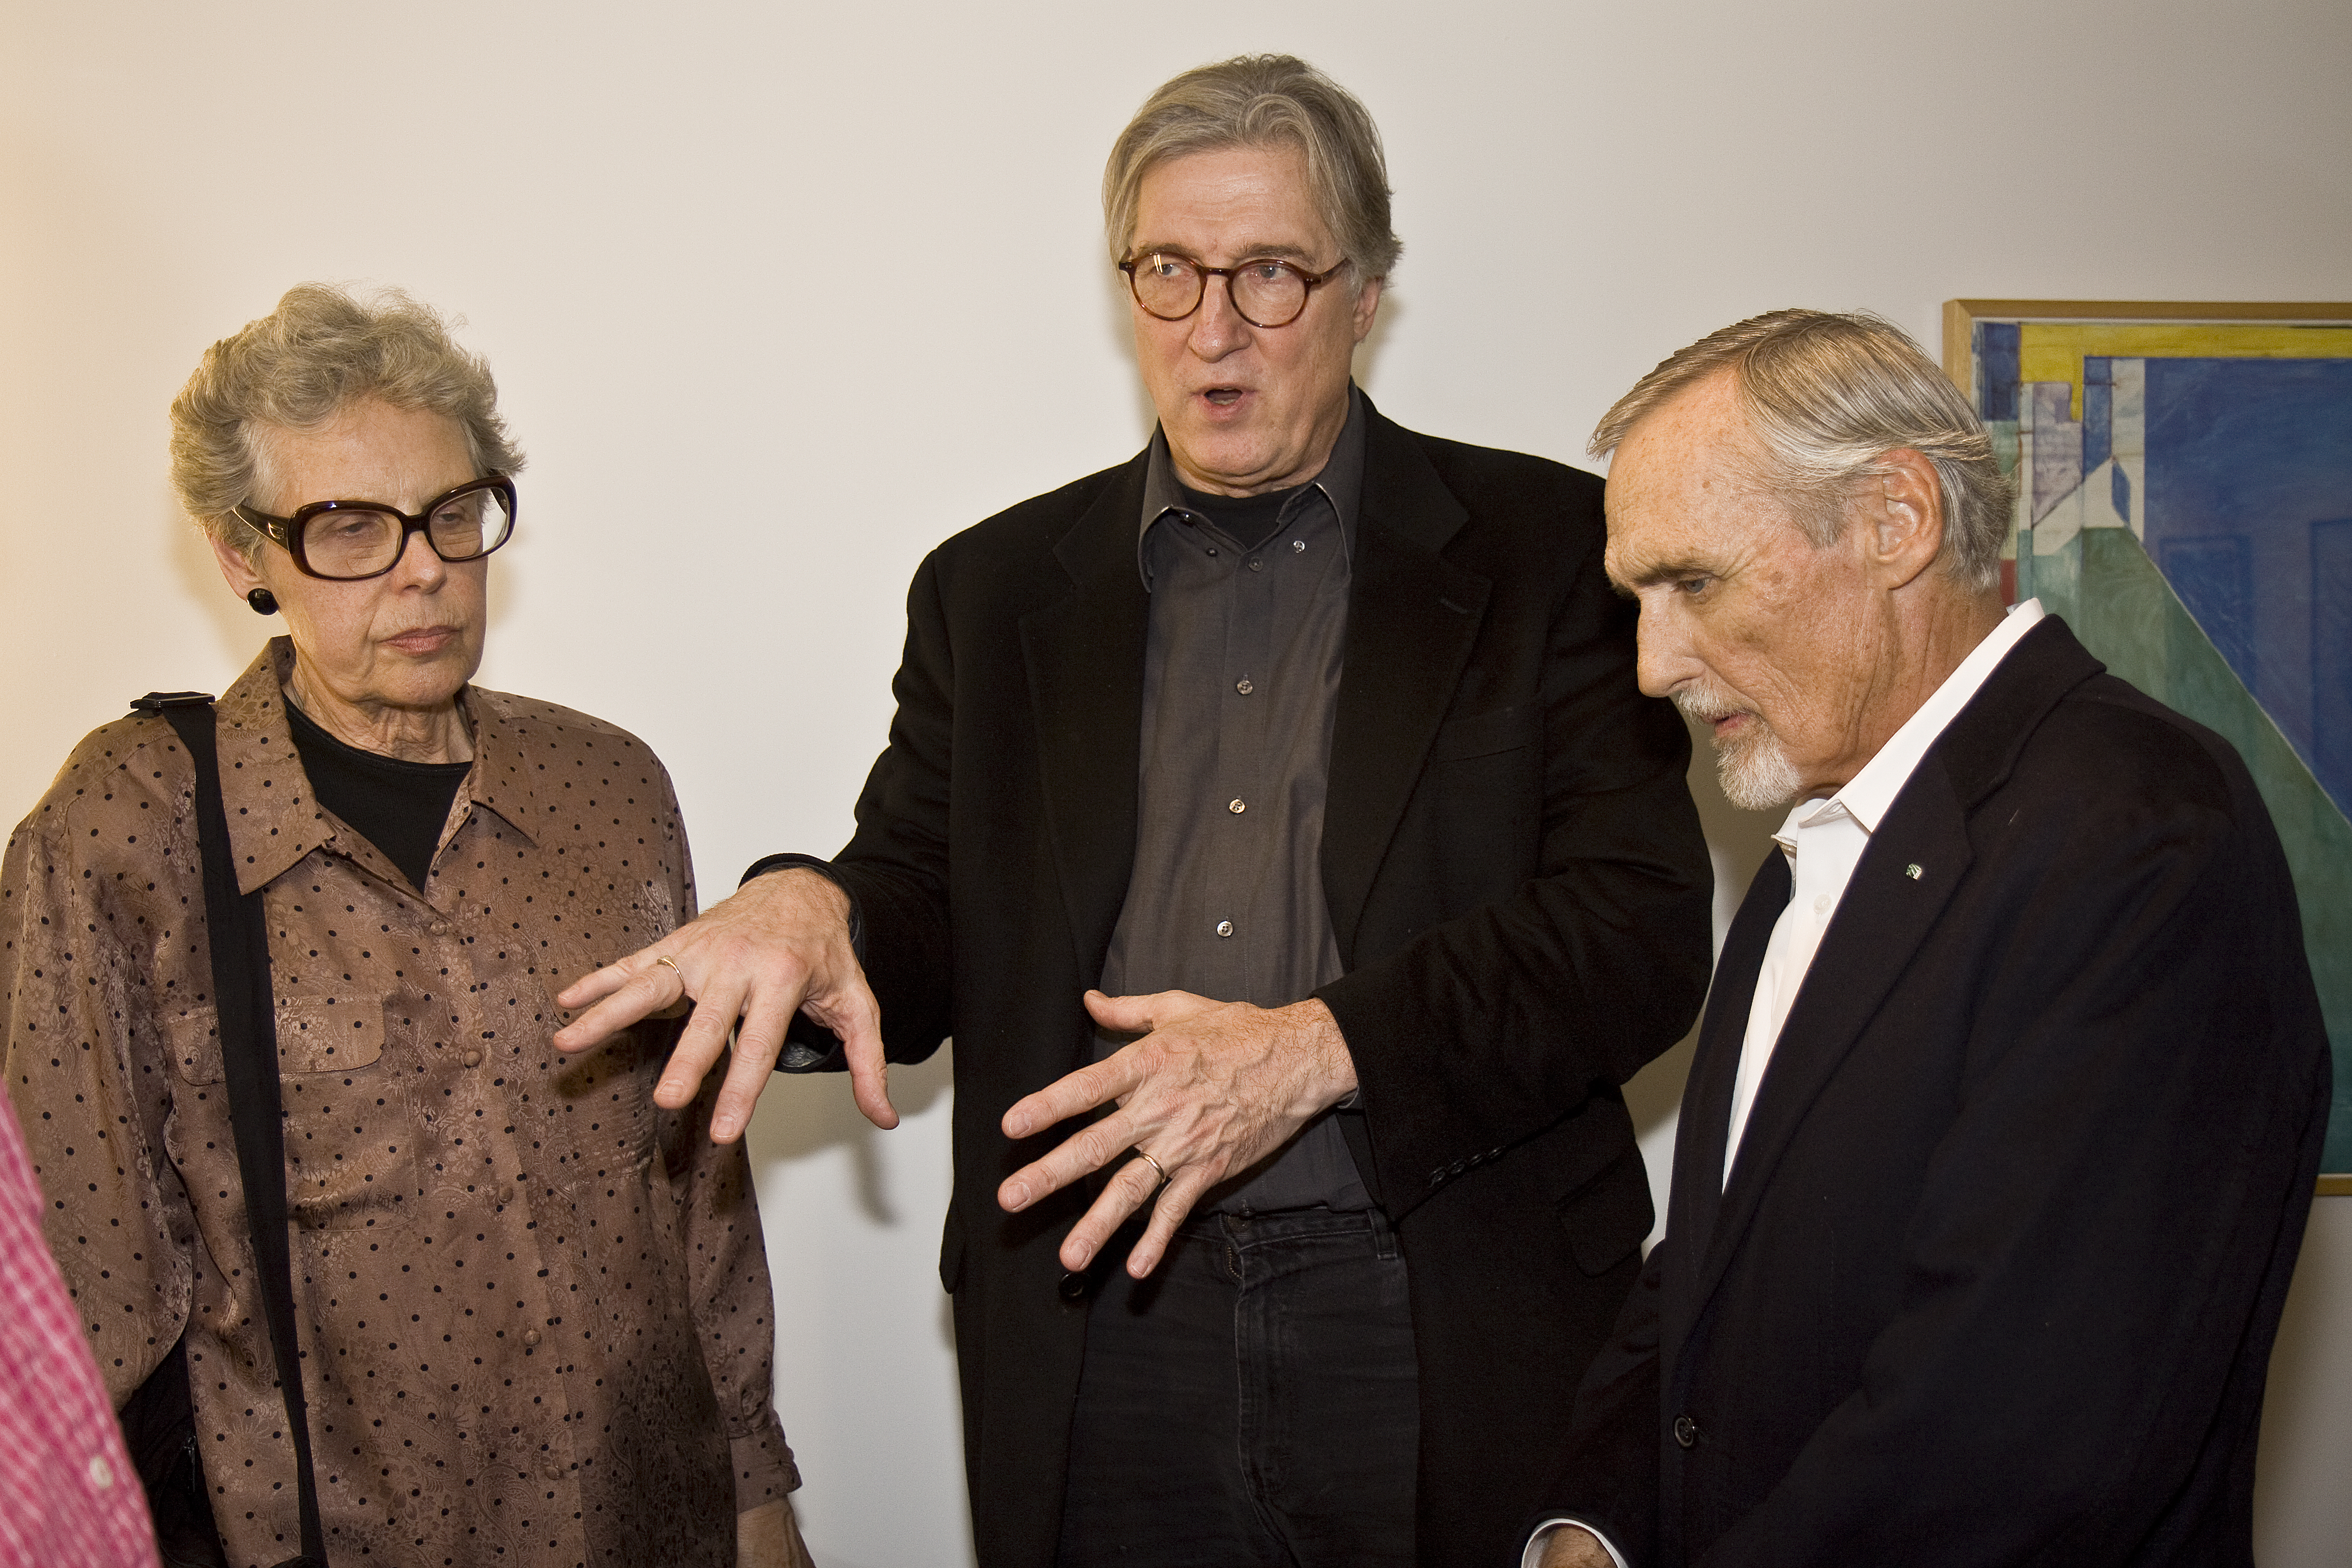 Mrs. Bruce Connor and Dennis Hopper at UCLA Film & Television Archive, 2012